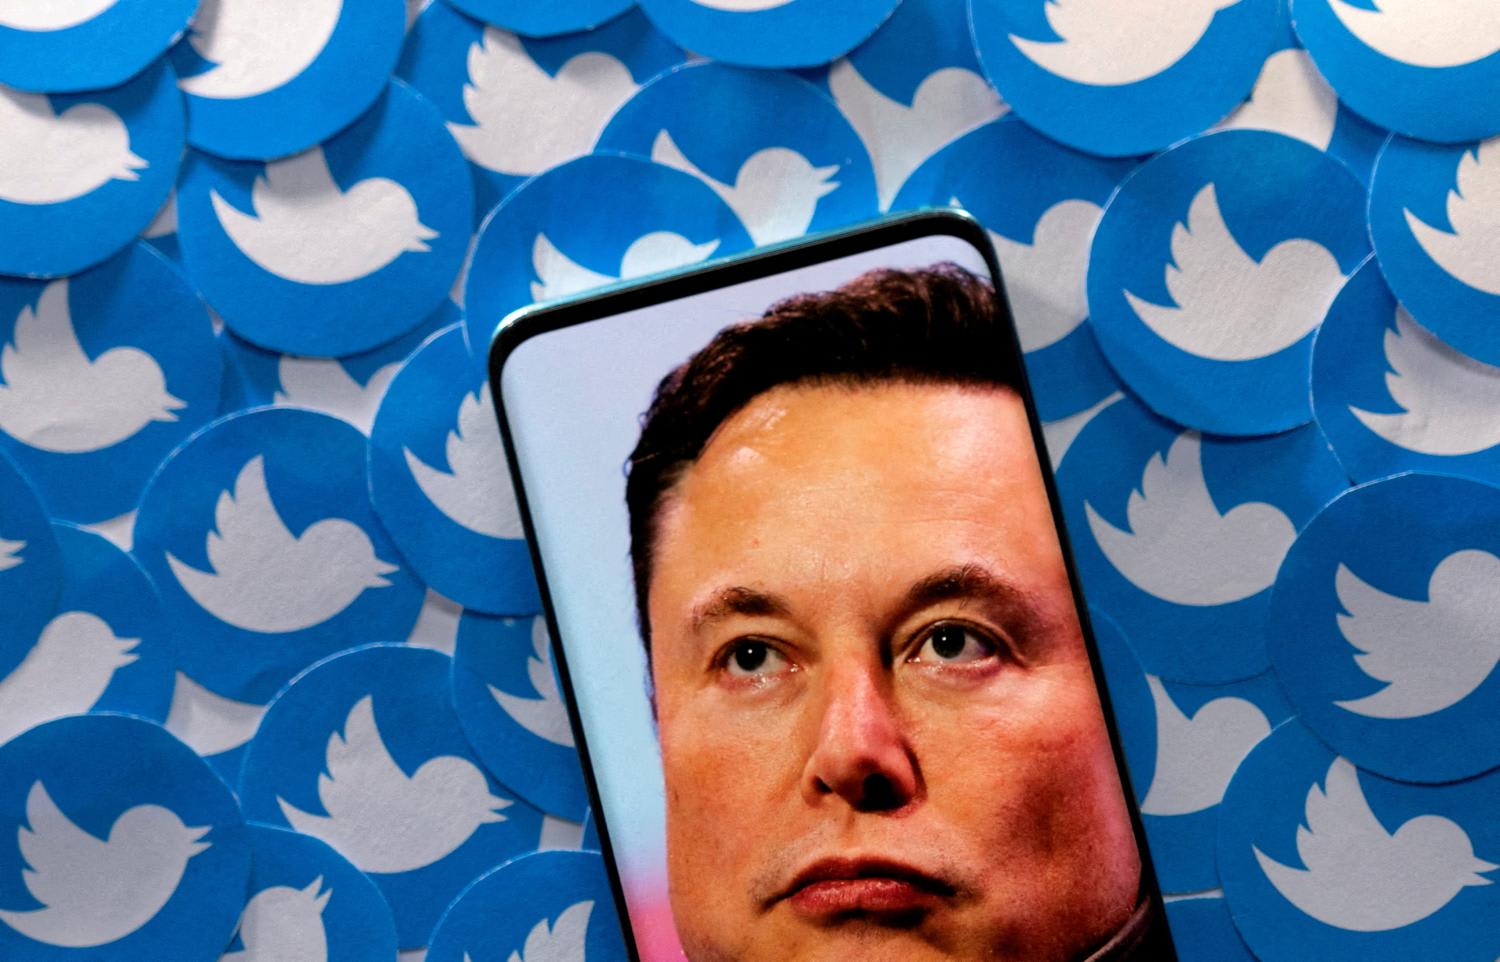 Mr Musk appeared via video call 10 minutes late to what turned out to be a freewheeling question and answer session moderated by a Twitter executive.